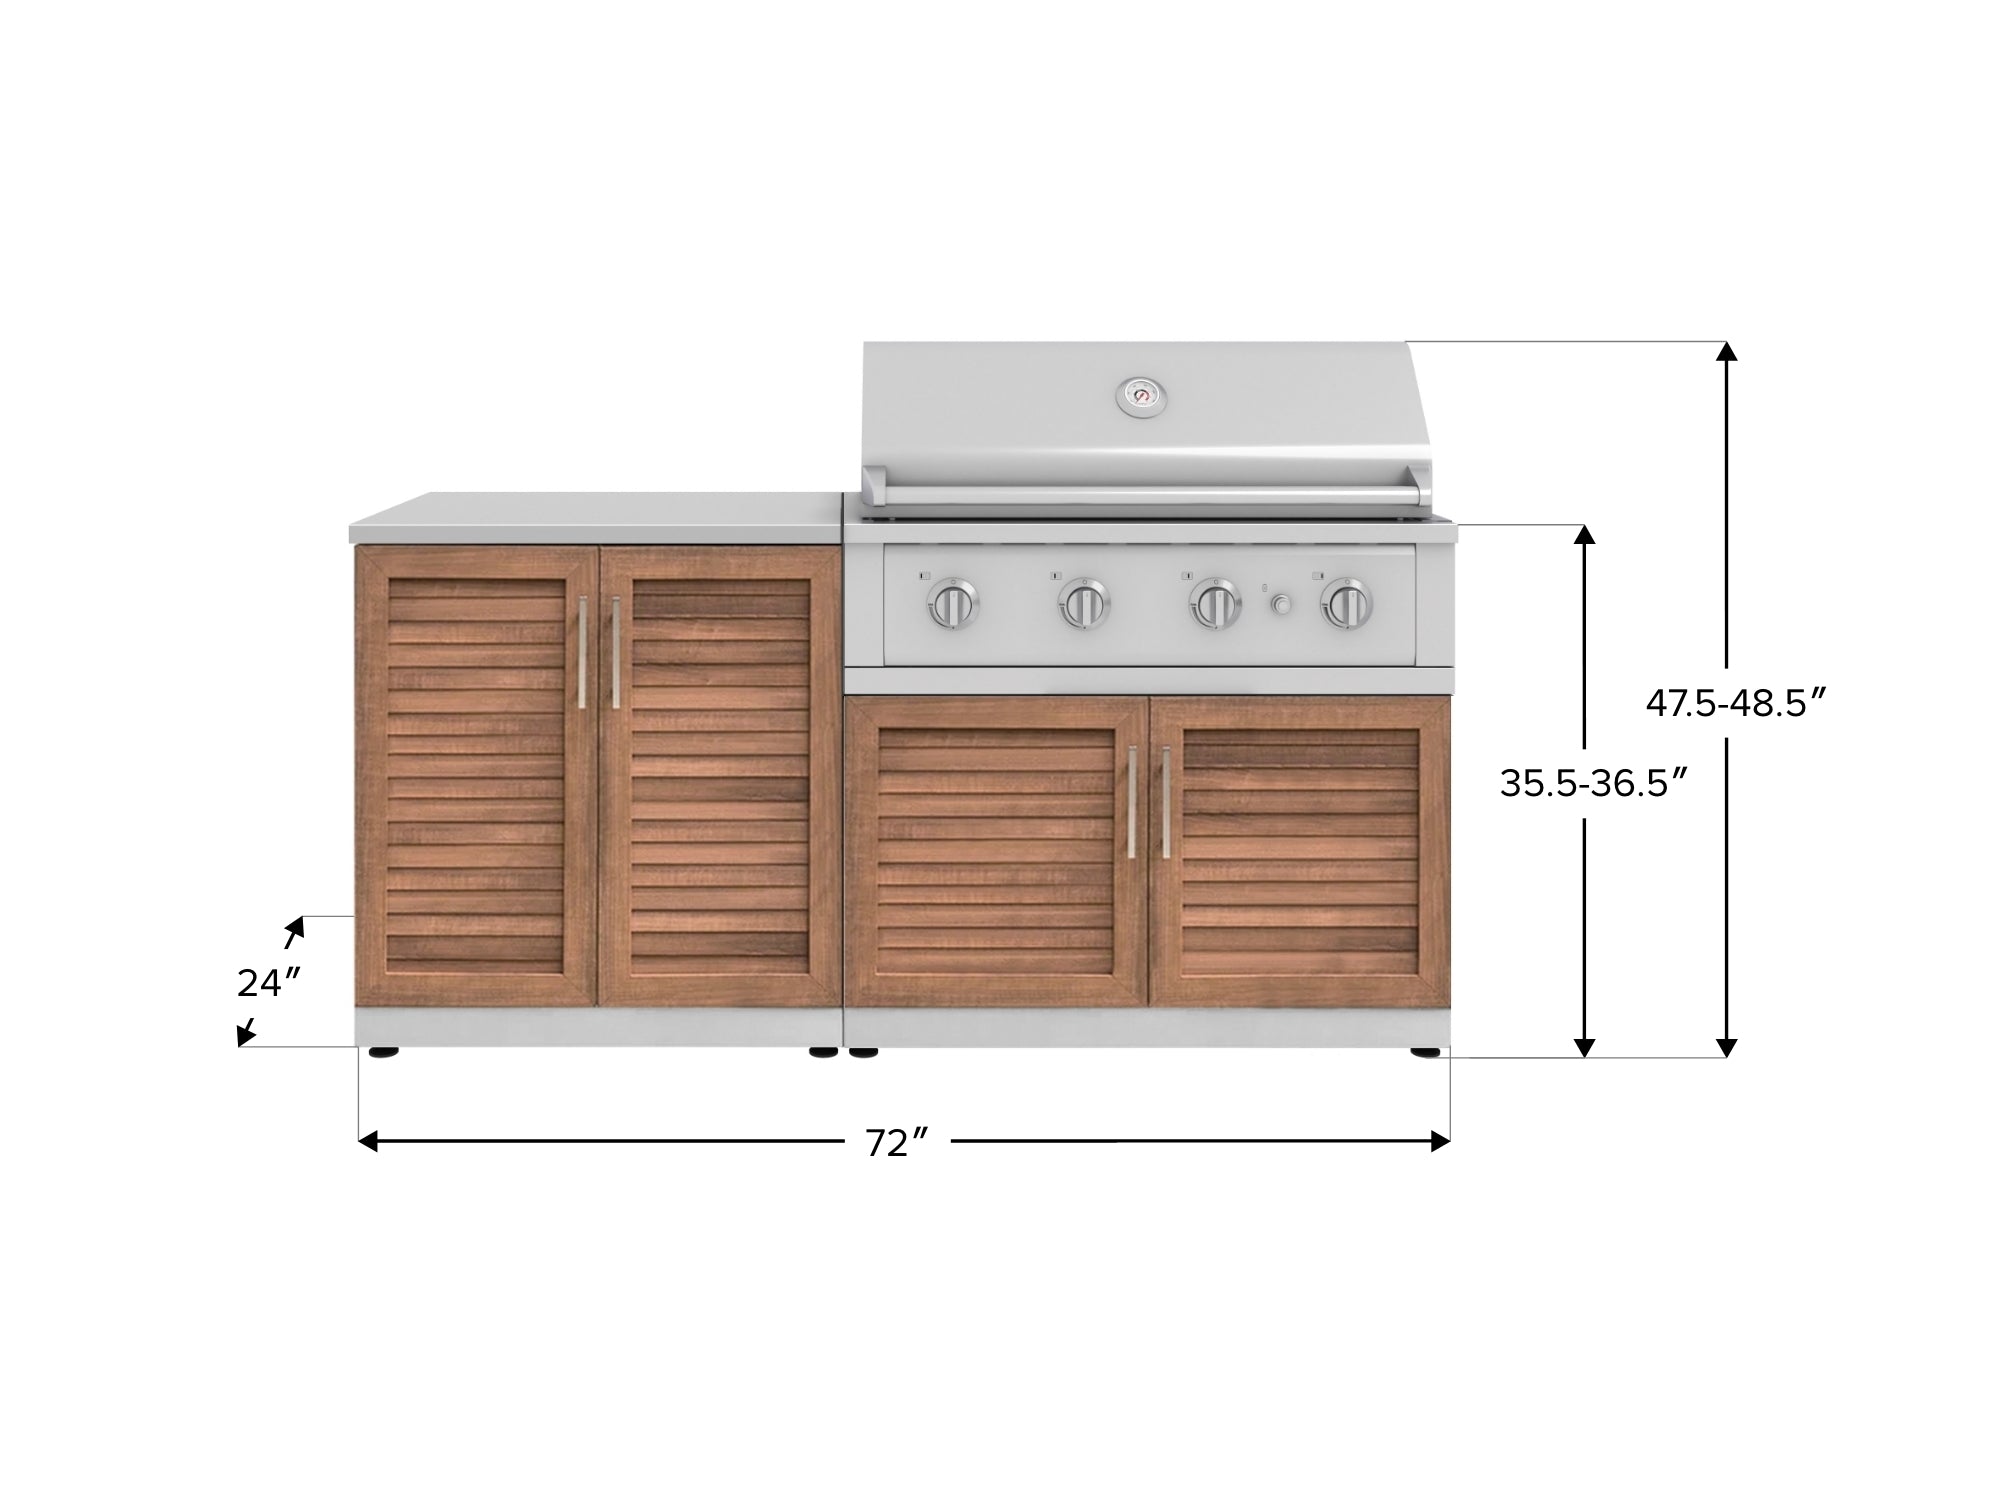 Outdoor Kitchen Stainless Steel 4 Piece Cabinet Set with 2 Door, Grill Cabinet, Performance Grill and Countertop